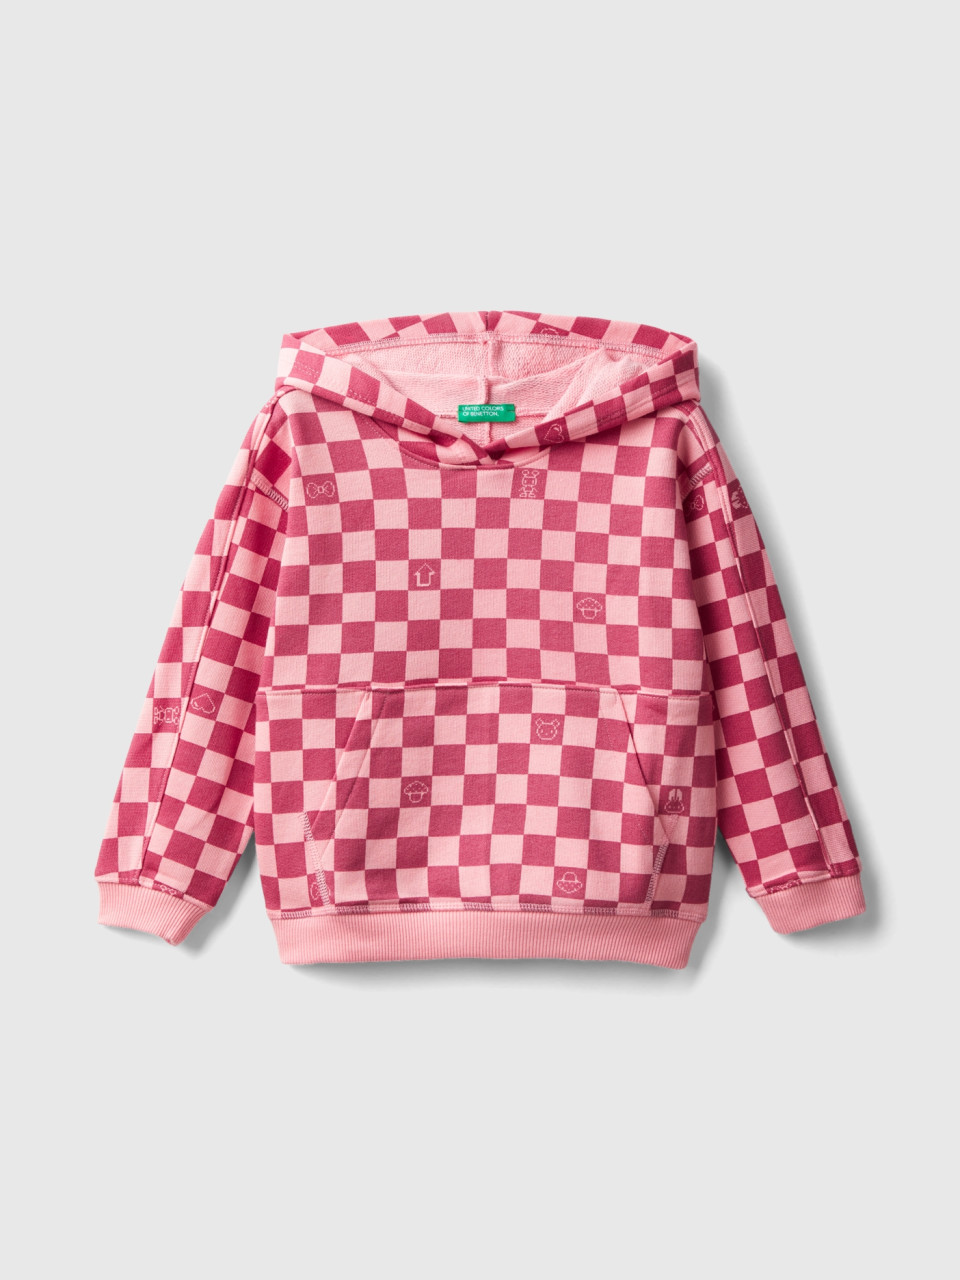 Benetton, Checkered Hoodie, Multi-color, Kids